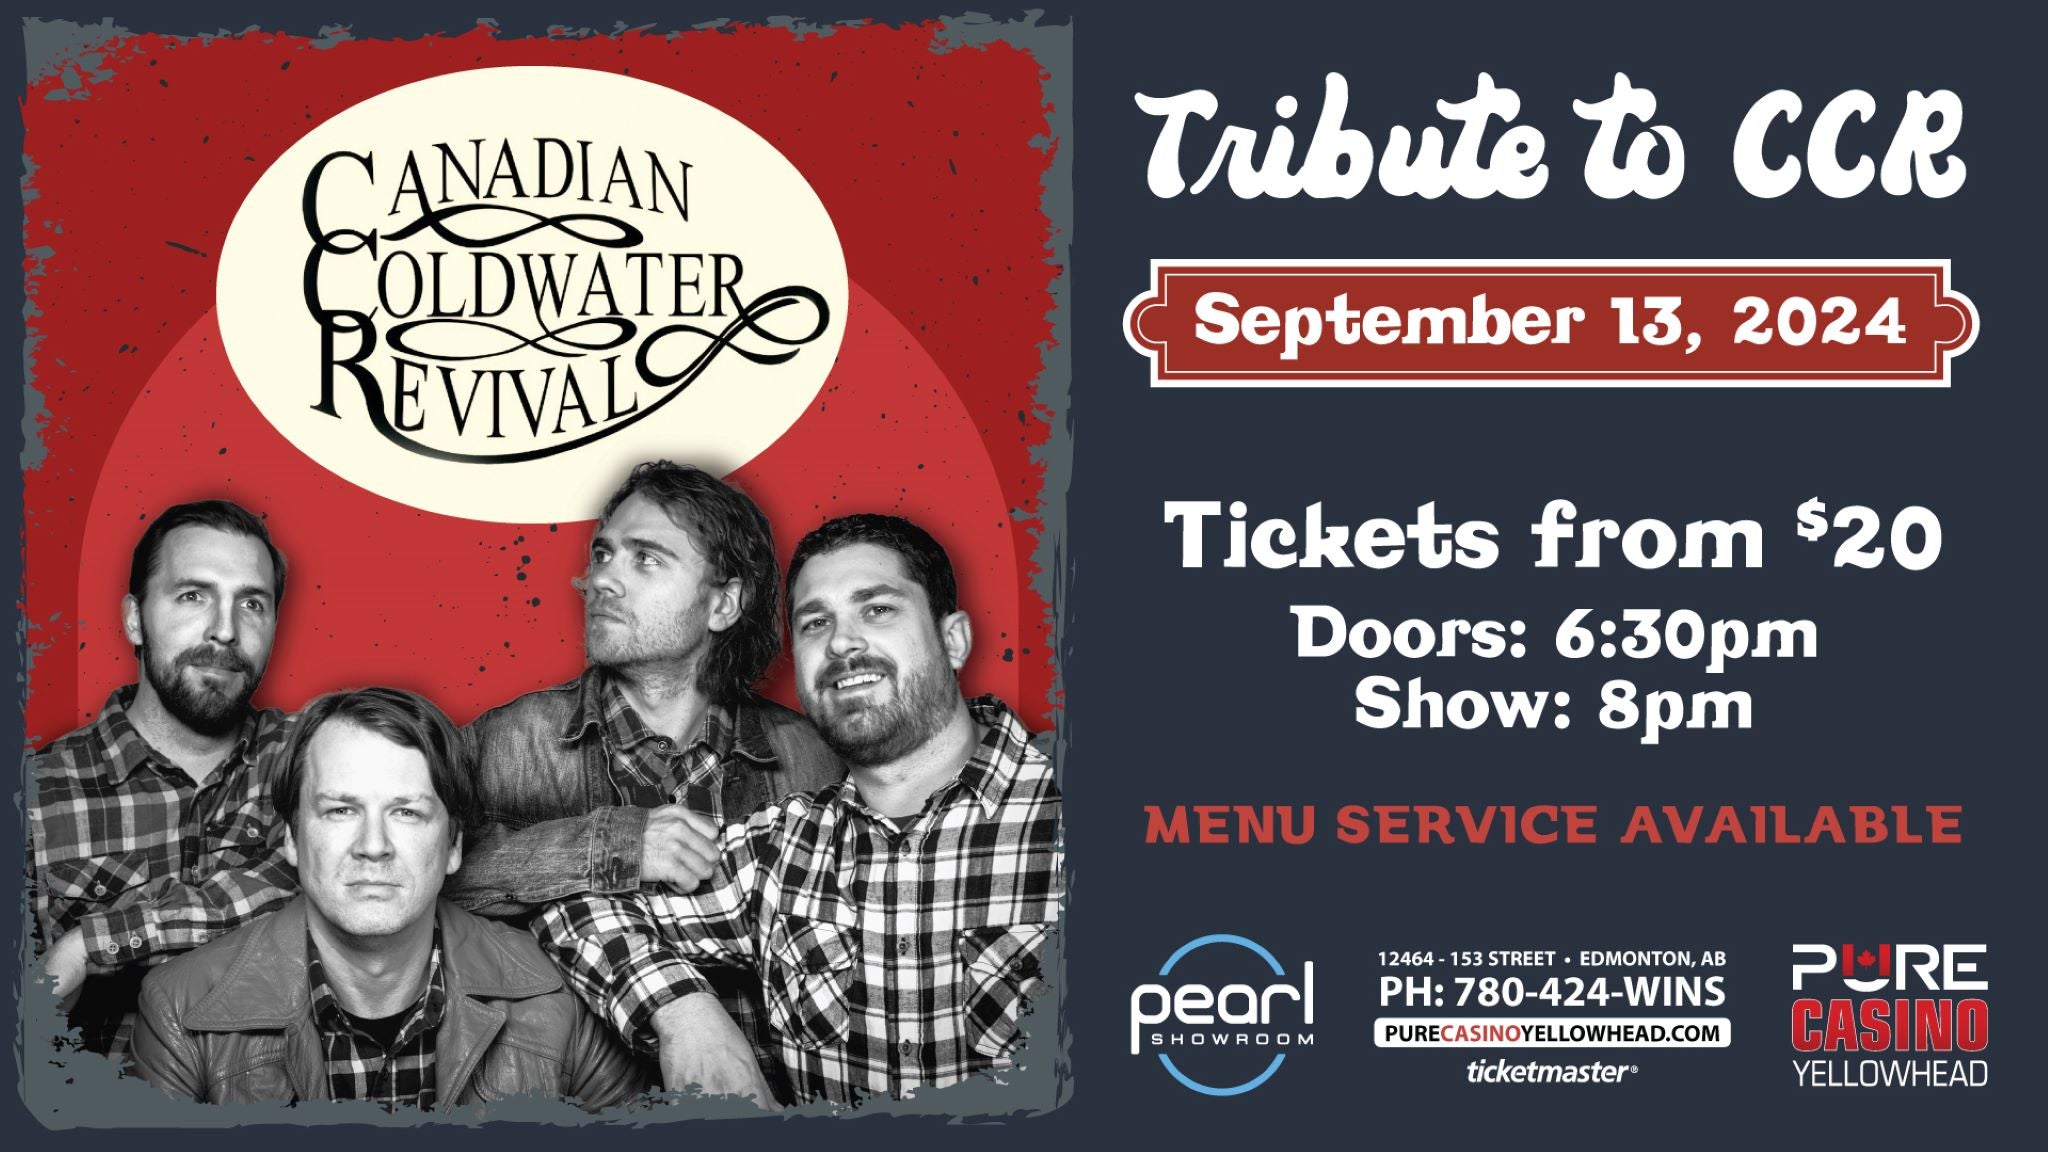 Canadian Coldwater Revival - Tribute to CCR